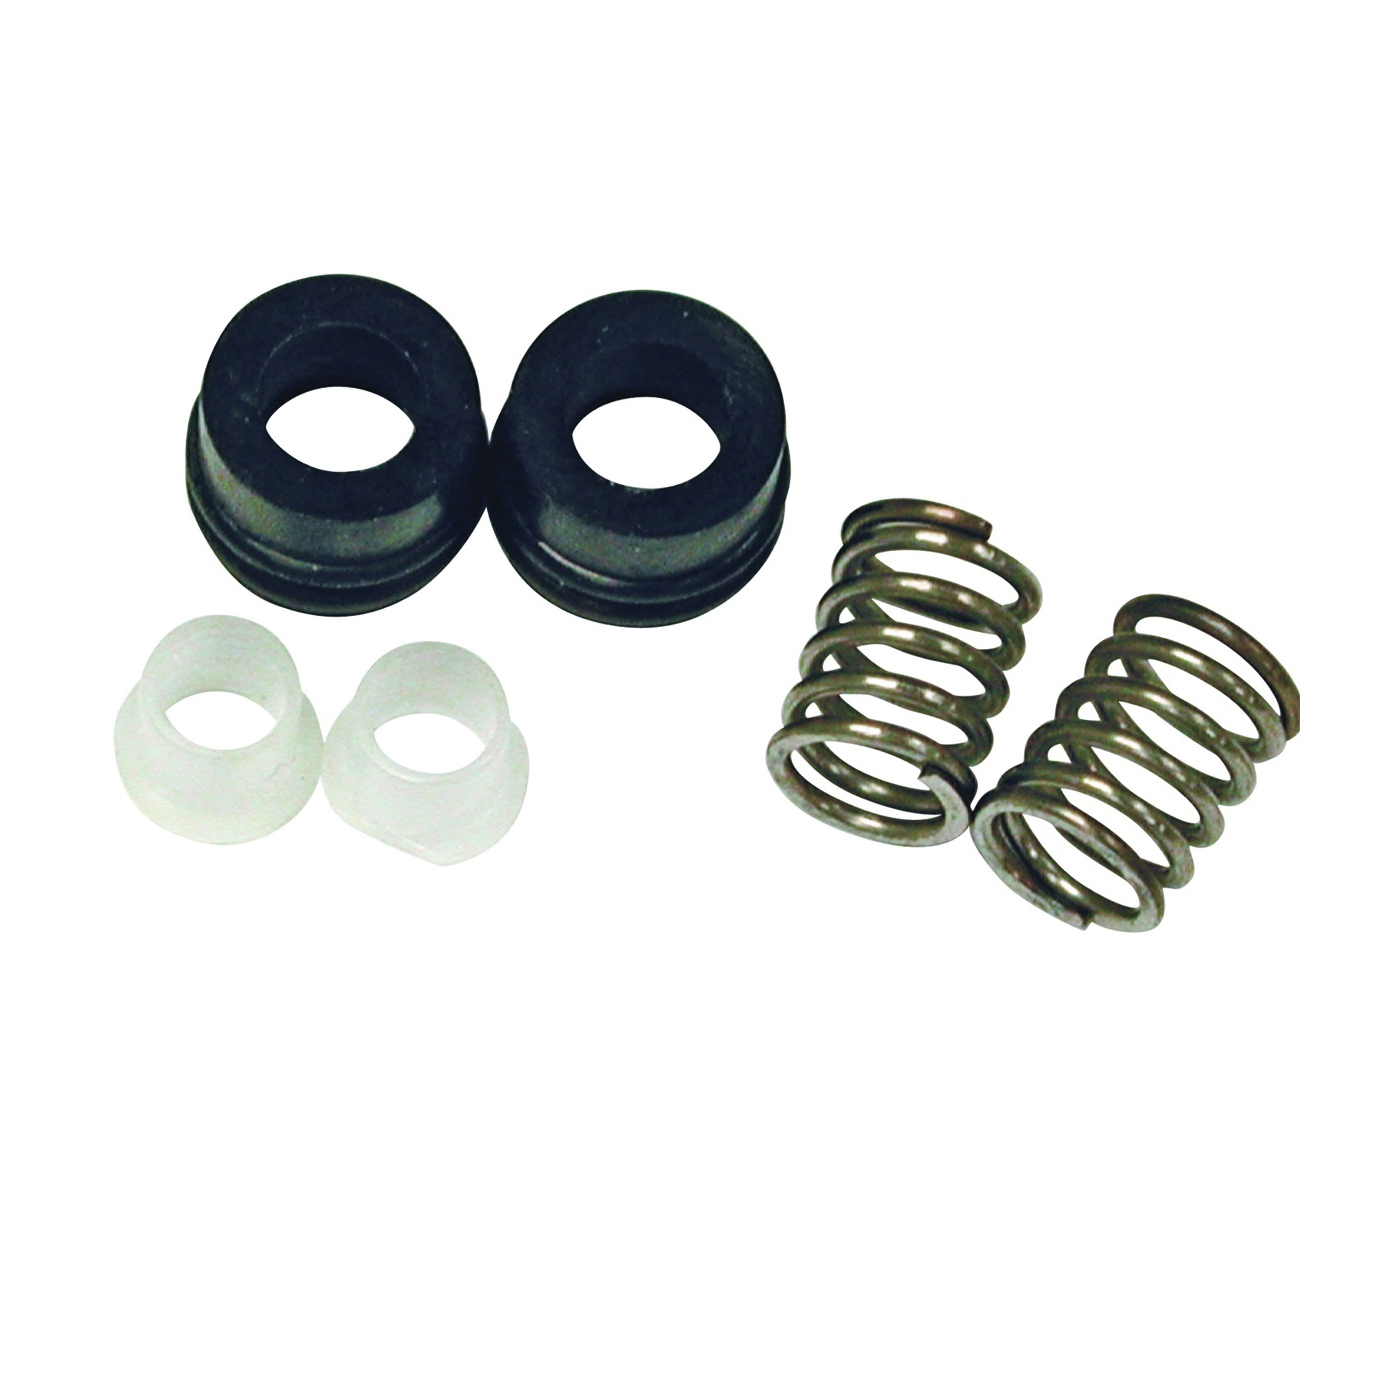 80686 Seat and Spring Kit, Plastic/Rubber/Stainless Steel, Black